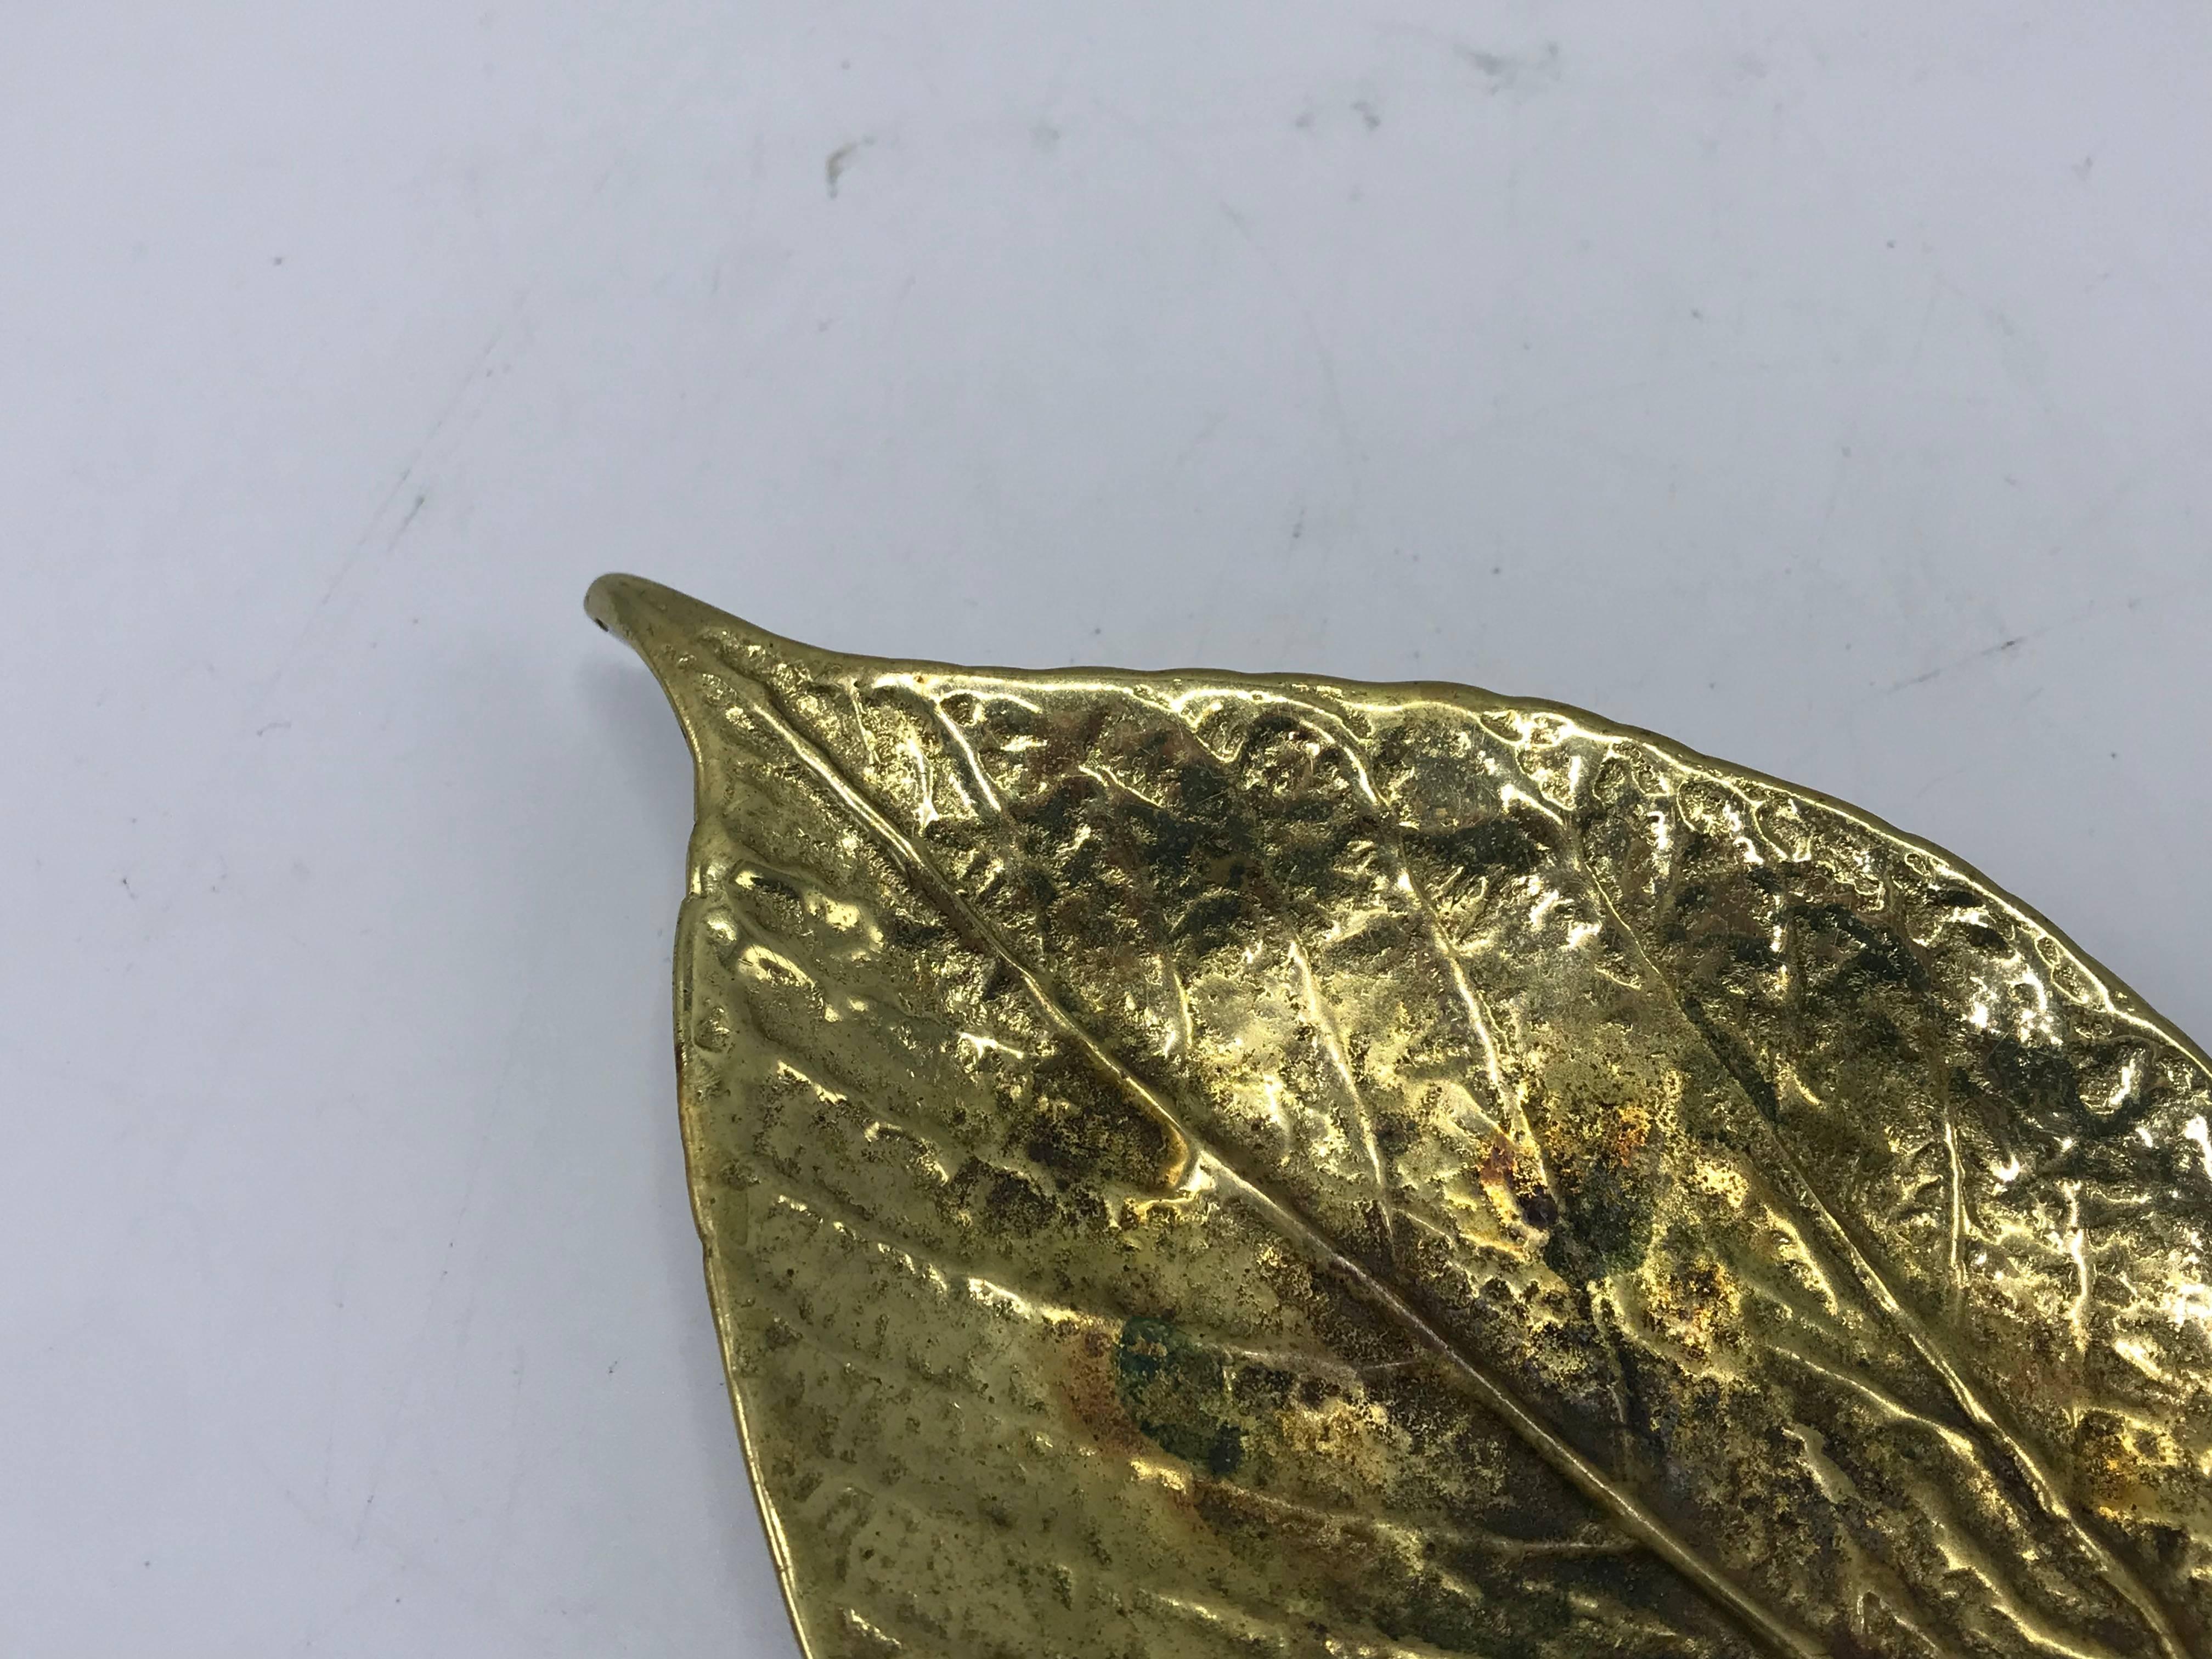 Offered is a beautiful, 1948 Virginia Metalcrafters solid-brass mulberry leaf sculpture. Marked on backside with Virginia Metalcrafters signature 'VMC' stamp, see last photo. Heavy.

“Since 1890, the Virginia Metalcrafters hallmark has become